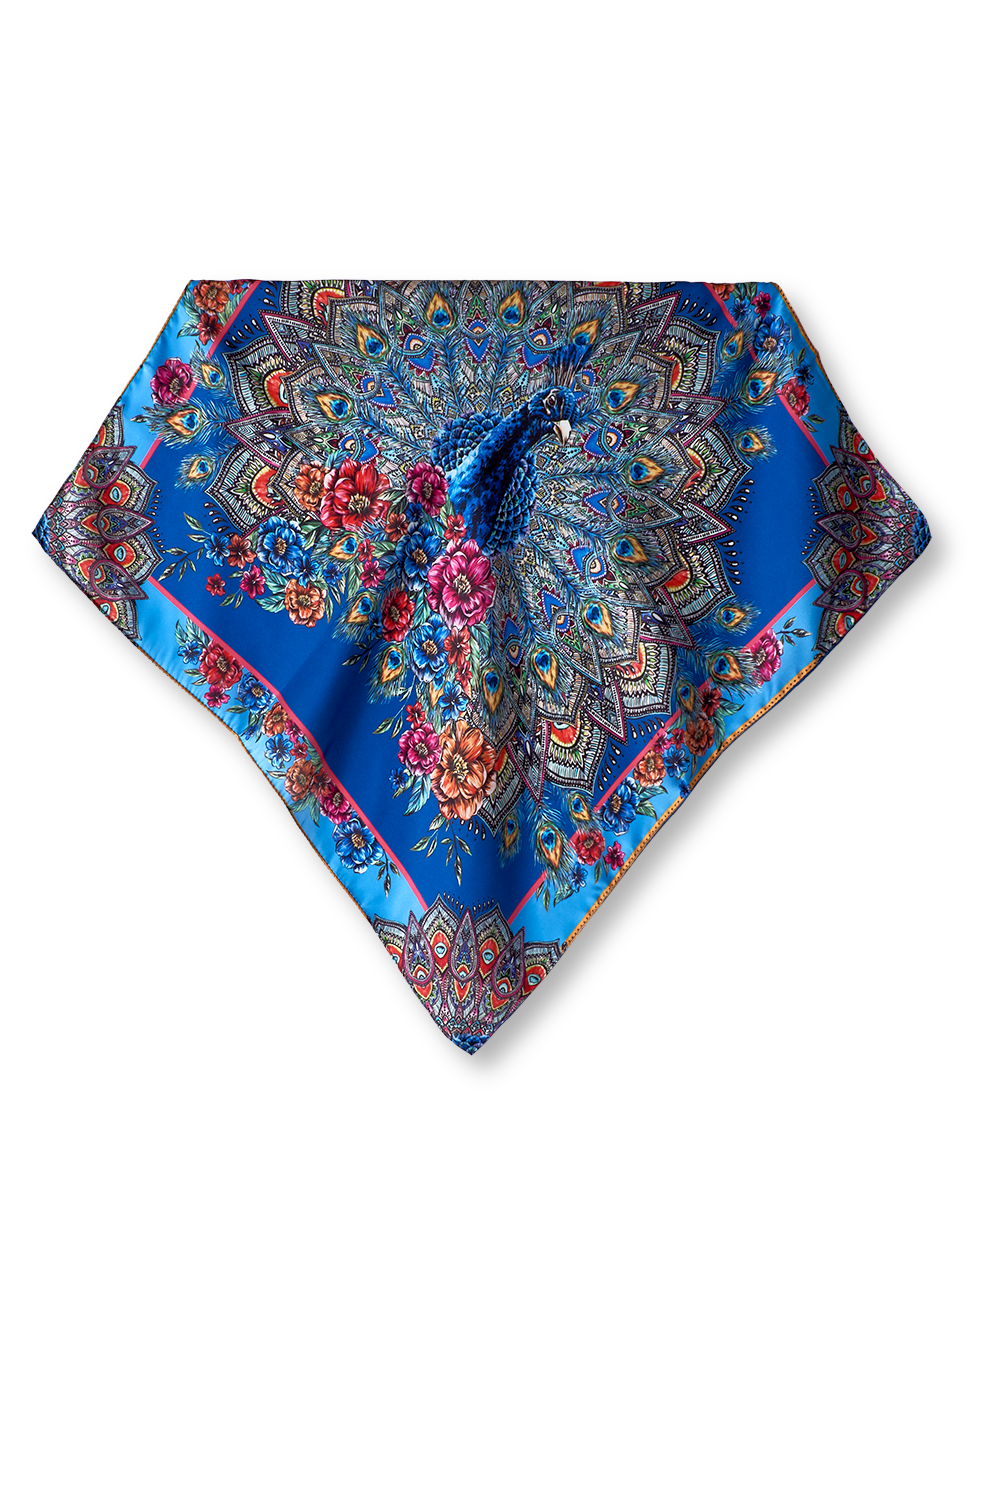 Blue Peacock scarf in polyester satin | 50x50cm